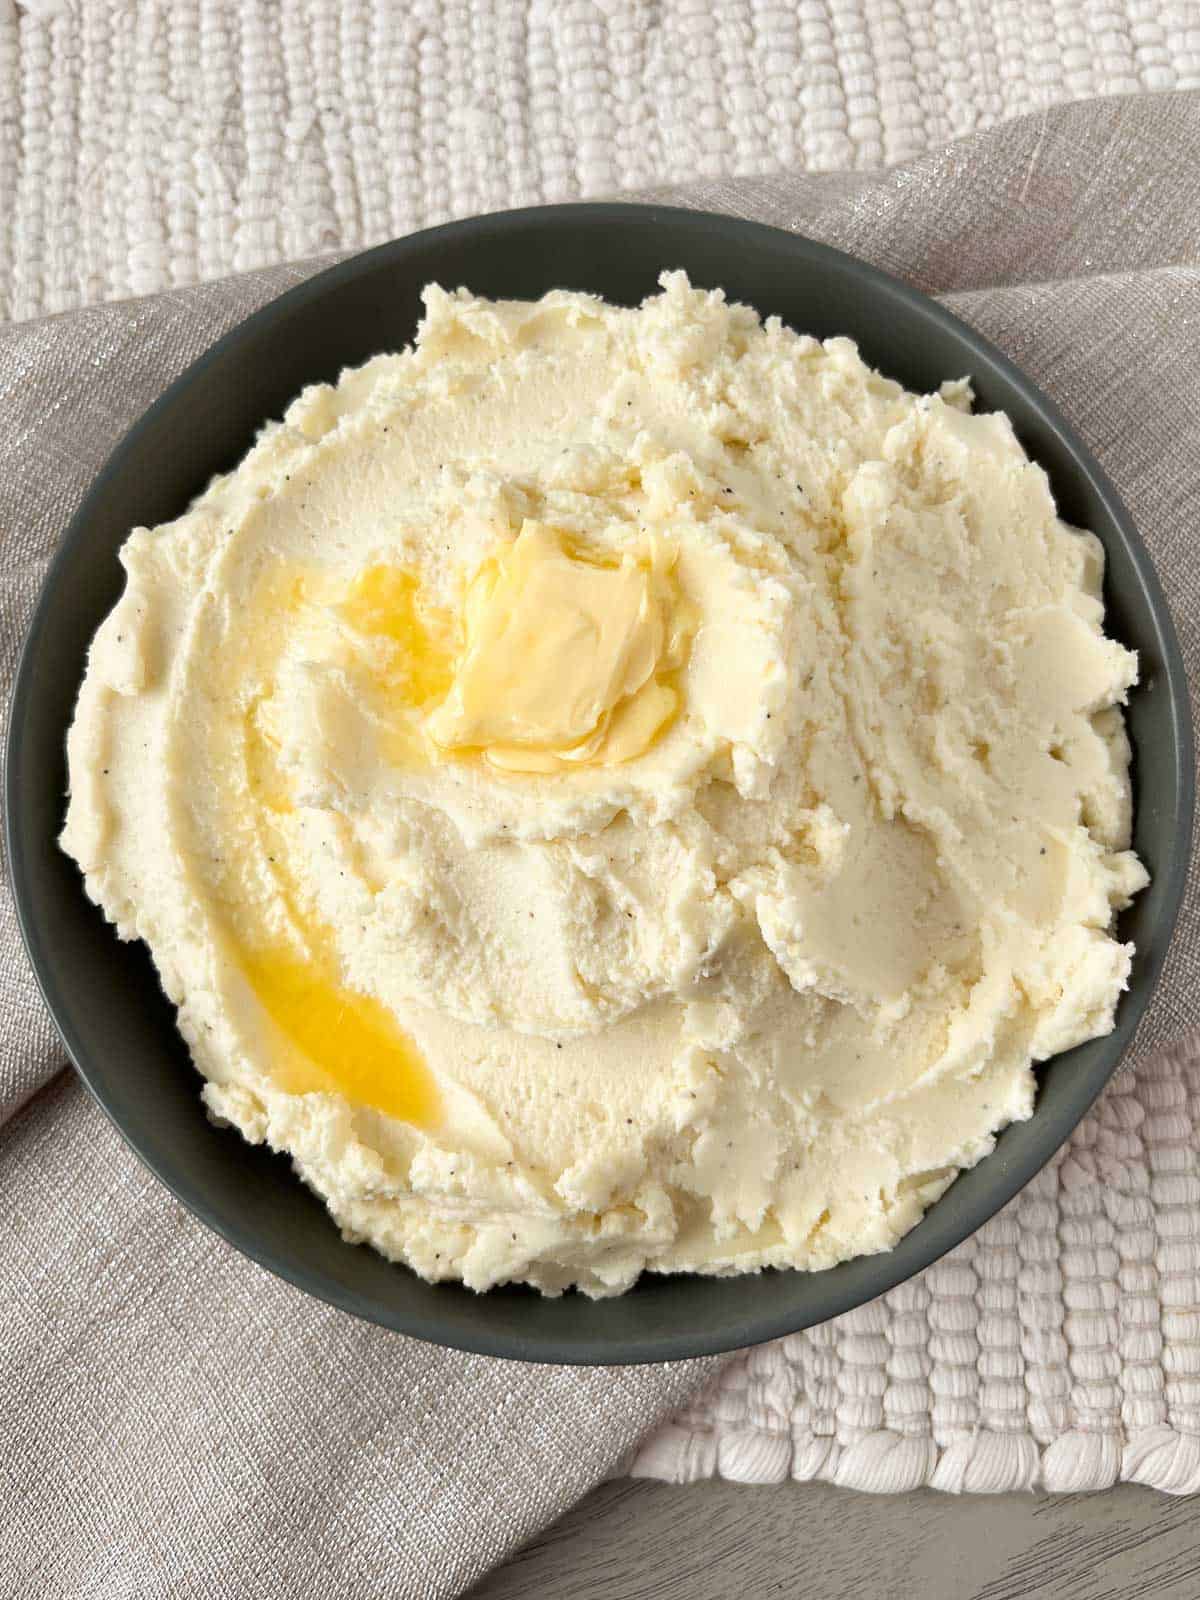 Mashed potatoes topped with melted butter in a serving bowl.